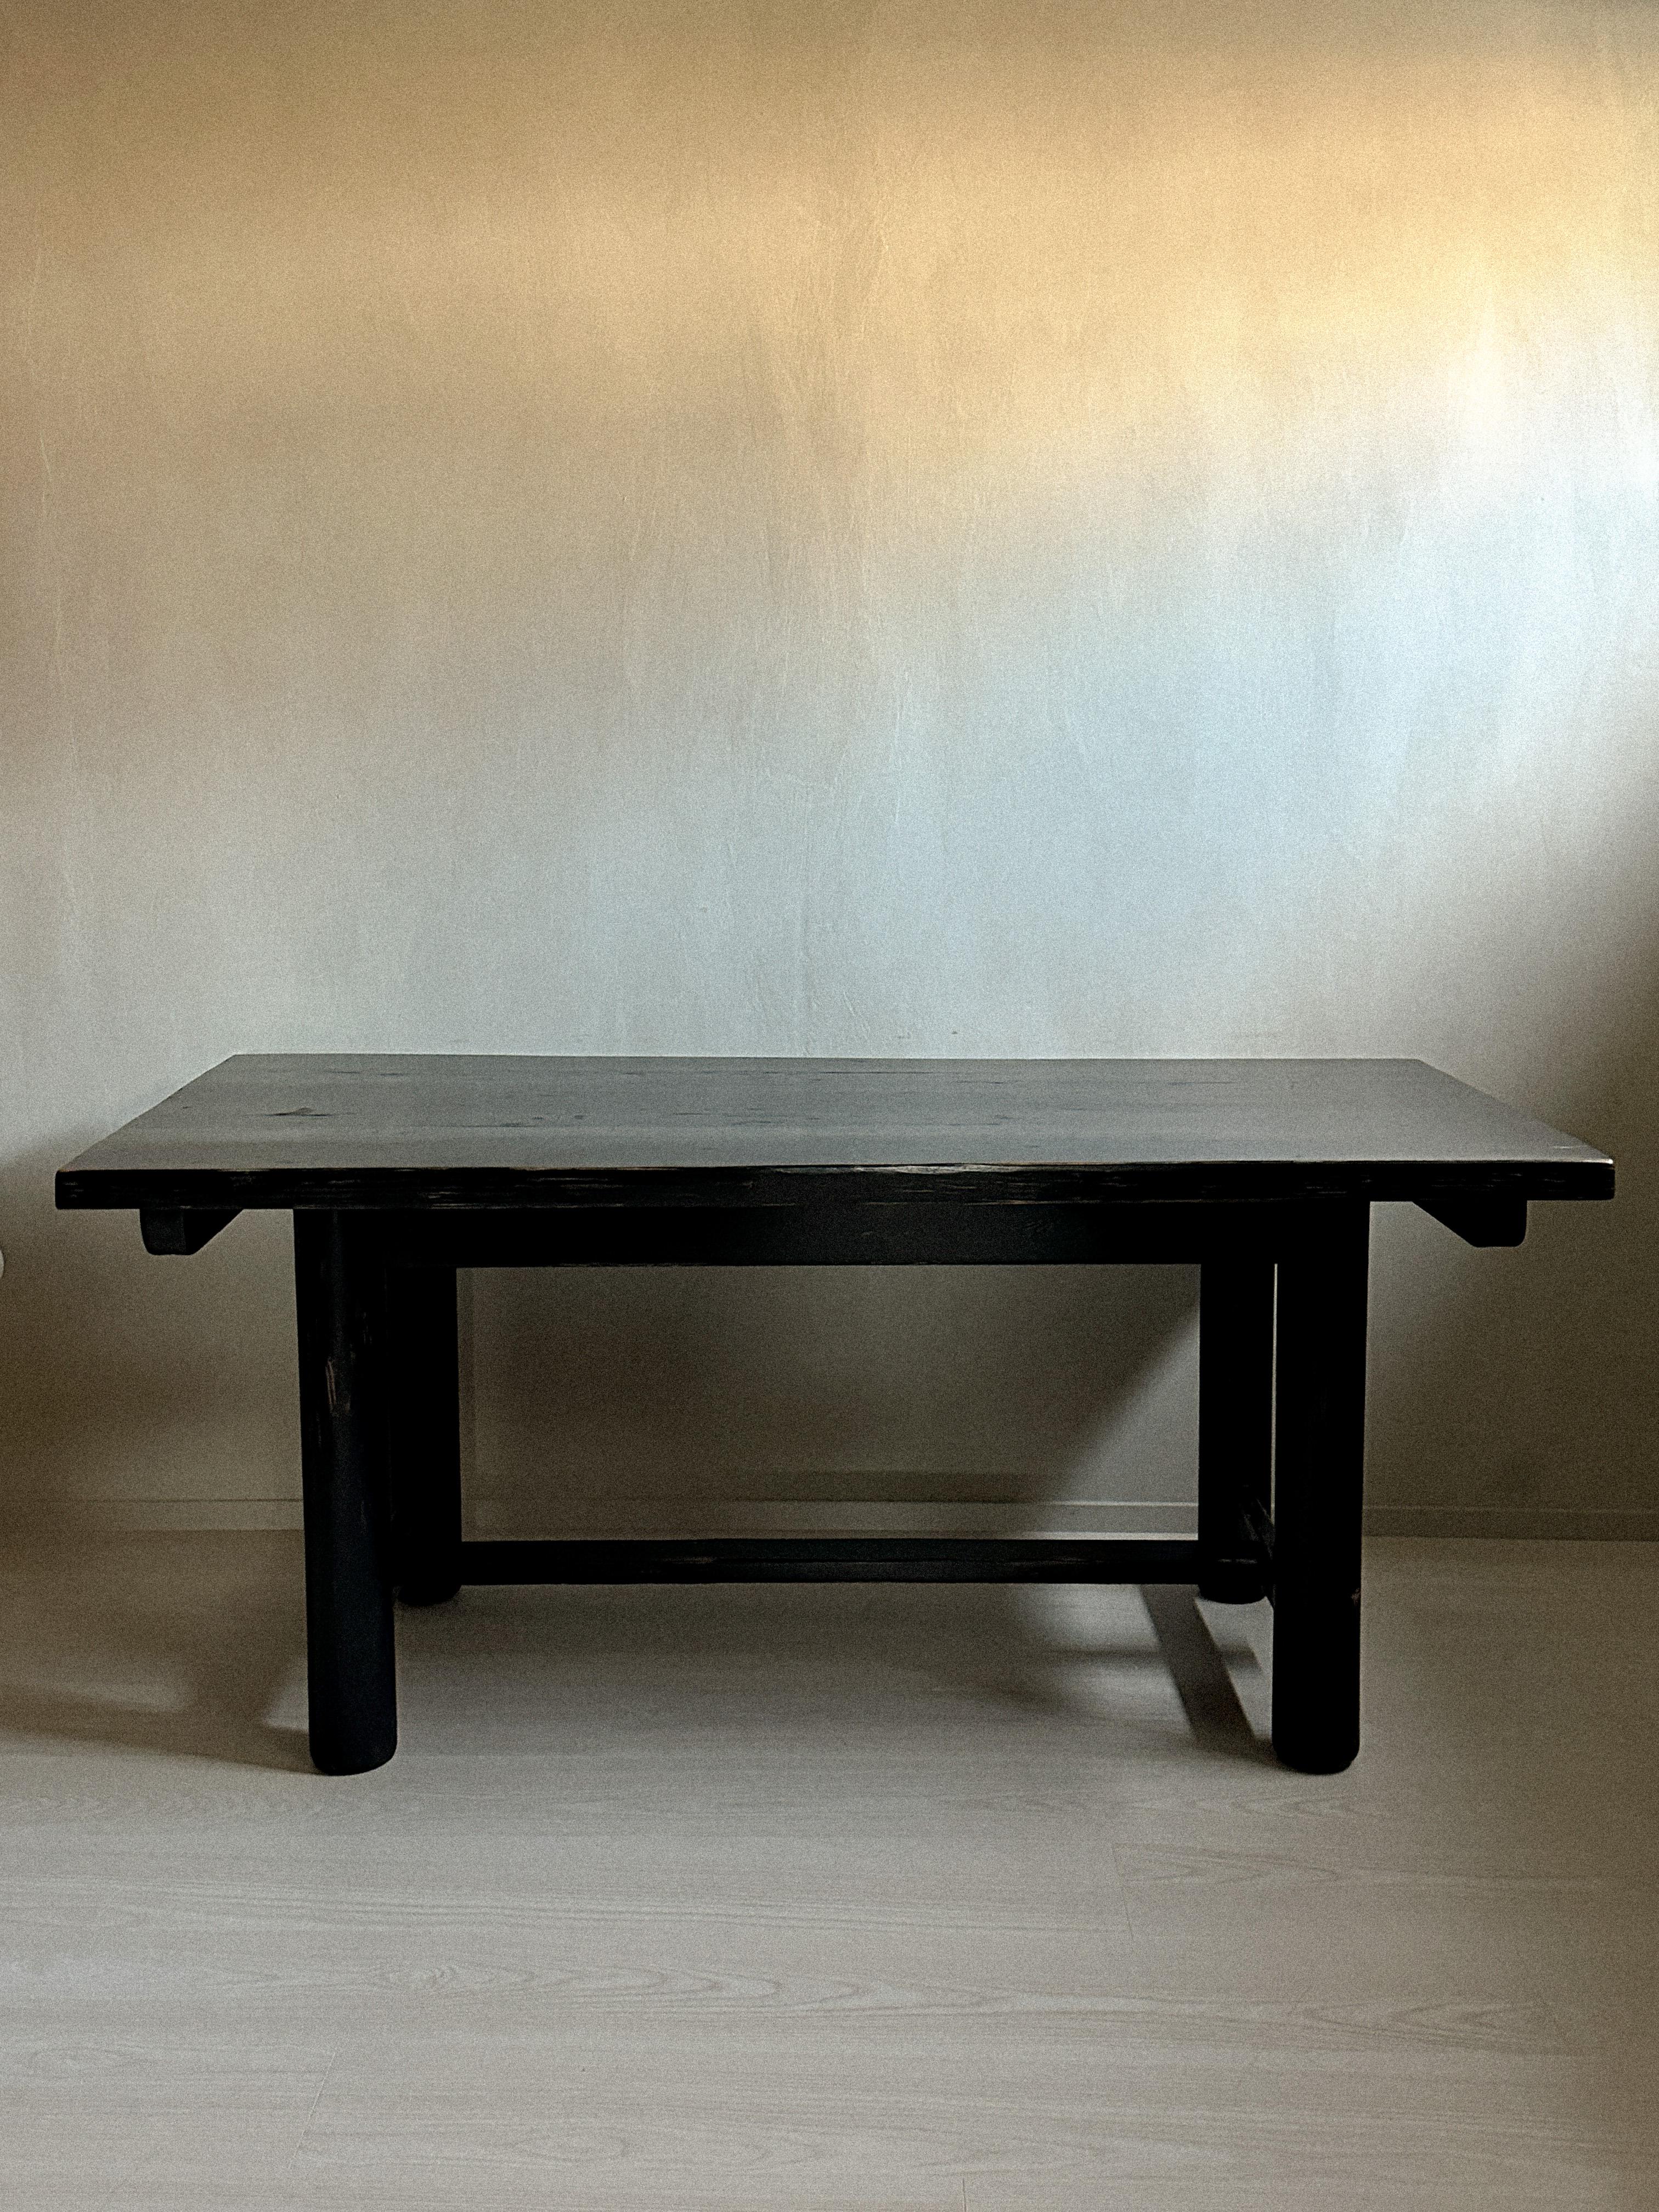 An Ebonized Meribel Dining Table, Wood, Charlotte Perriand (attr.), France 1959 For Sale 1